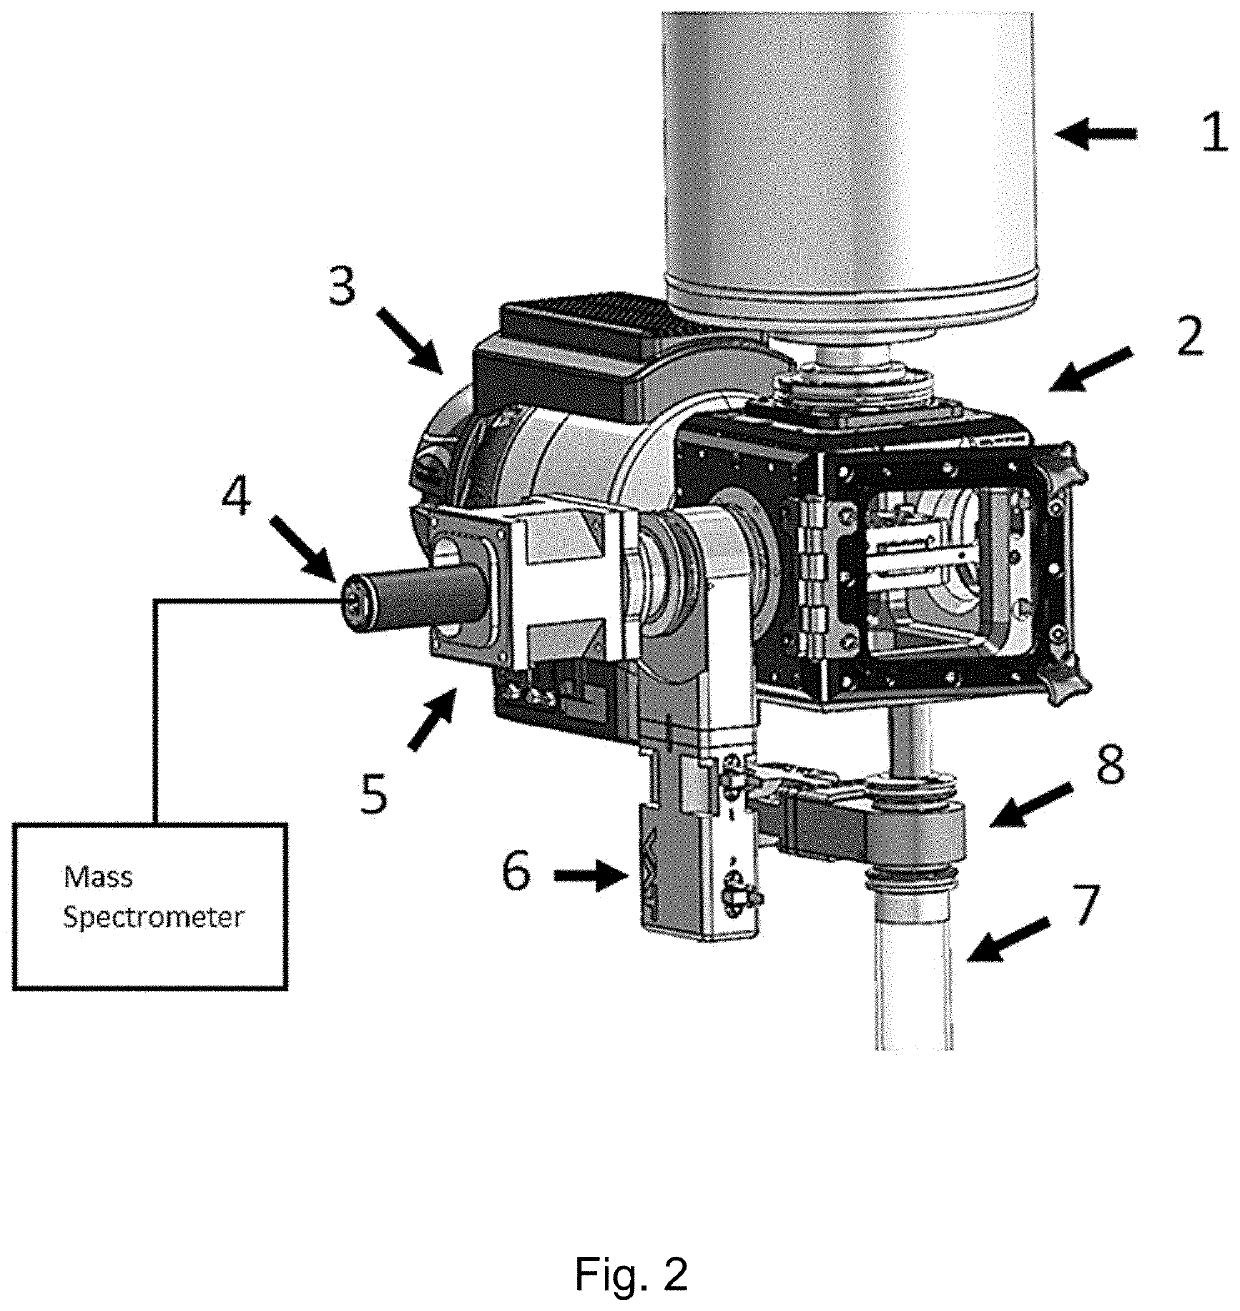 Retractable Ion Guide, Grid Holder, and Technology for Removal of Cryogenic Sample from Vacuum